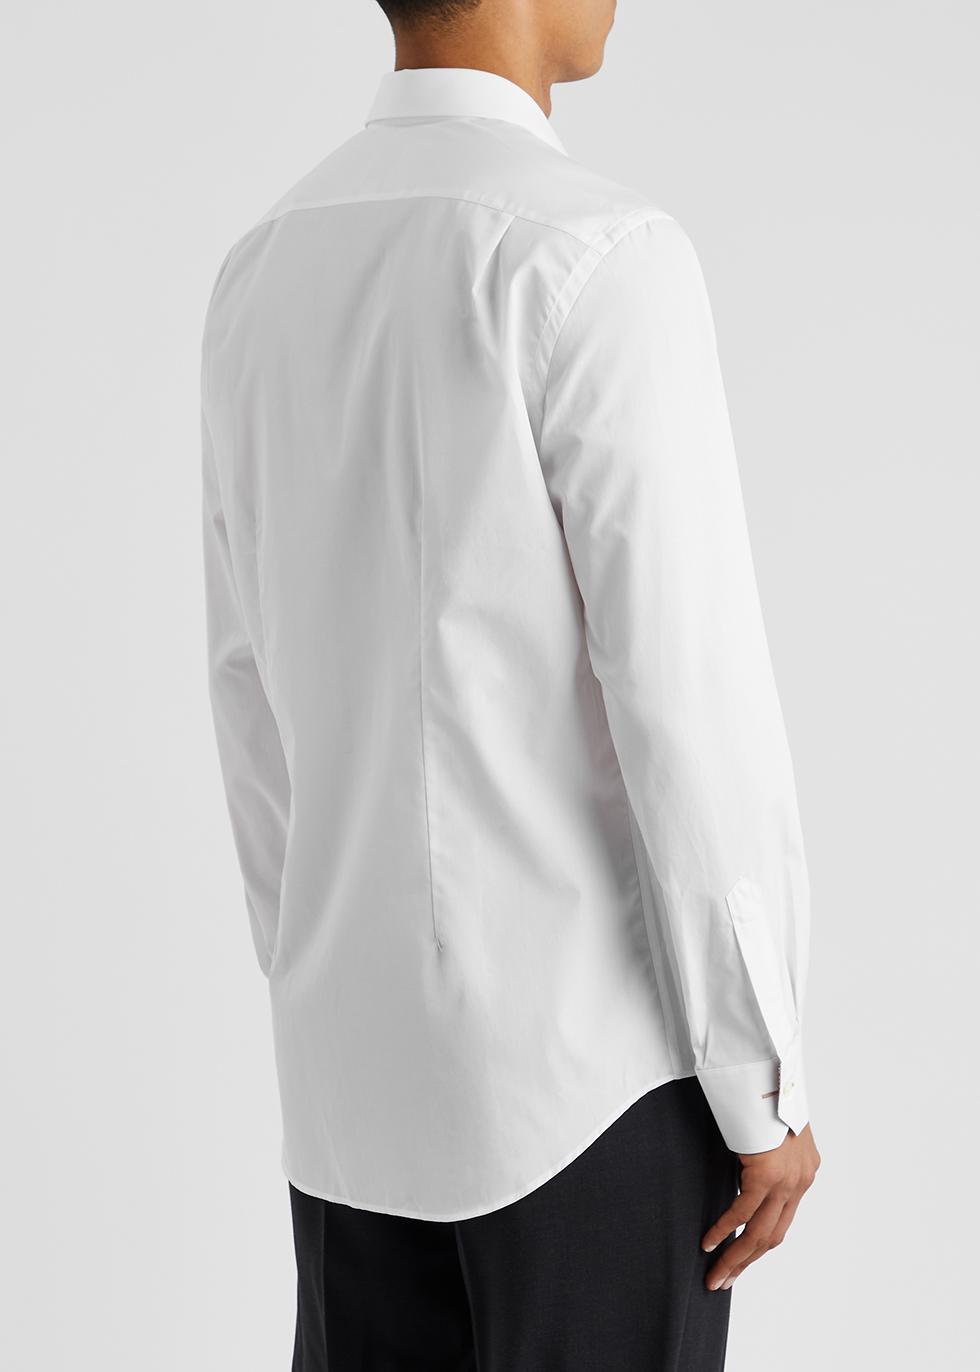 Paul Smith Cotton Shirt in White for Men | Lyst